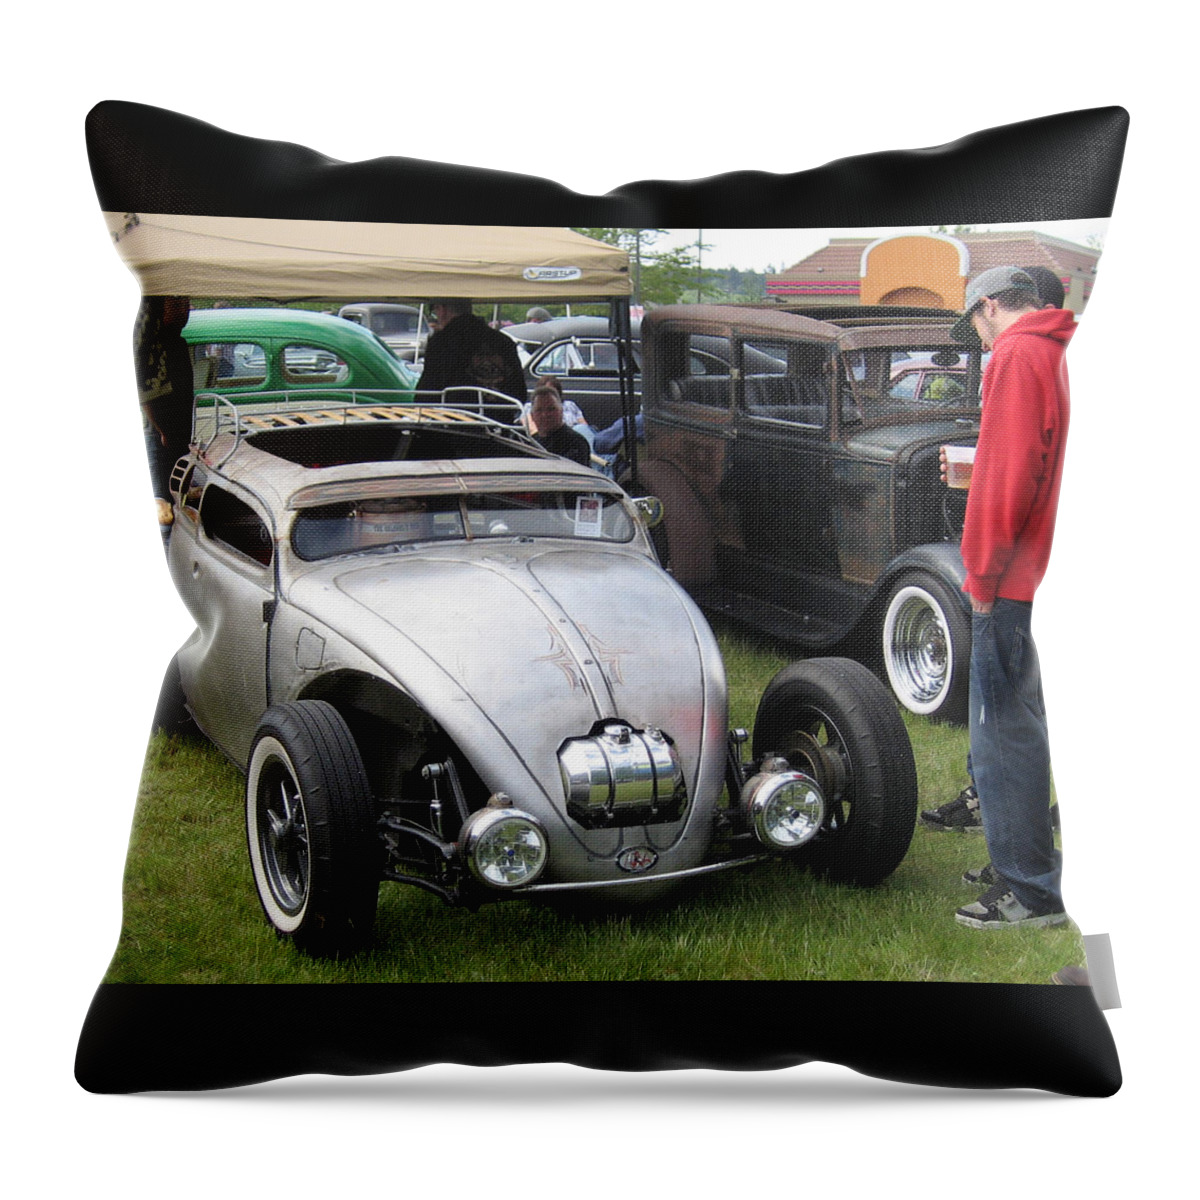 Rat Rod Throw Pillow featuring the photograph Rat Rod Many Parts by Kym Backland